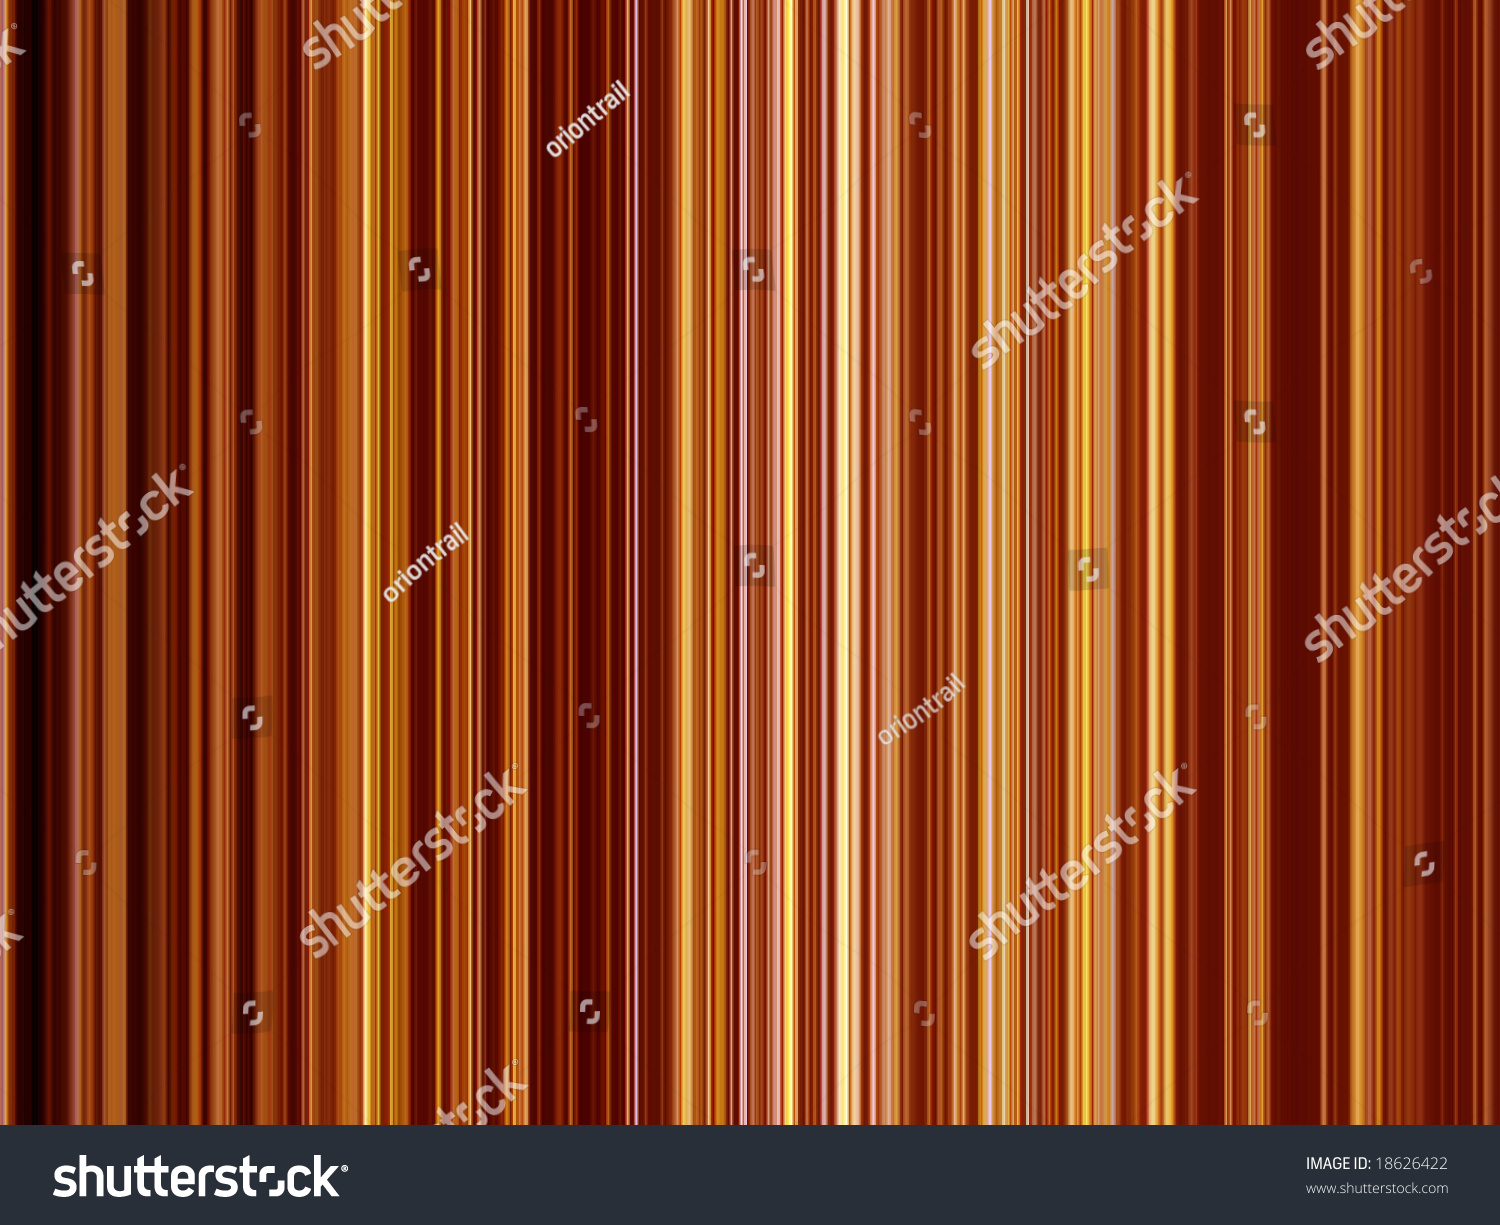 Abstract Vertical Lines On Black Stock Photo 18626422 : Shutterstock